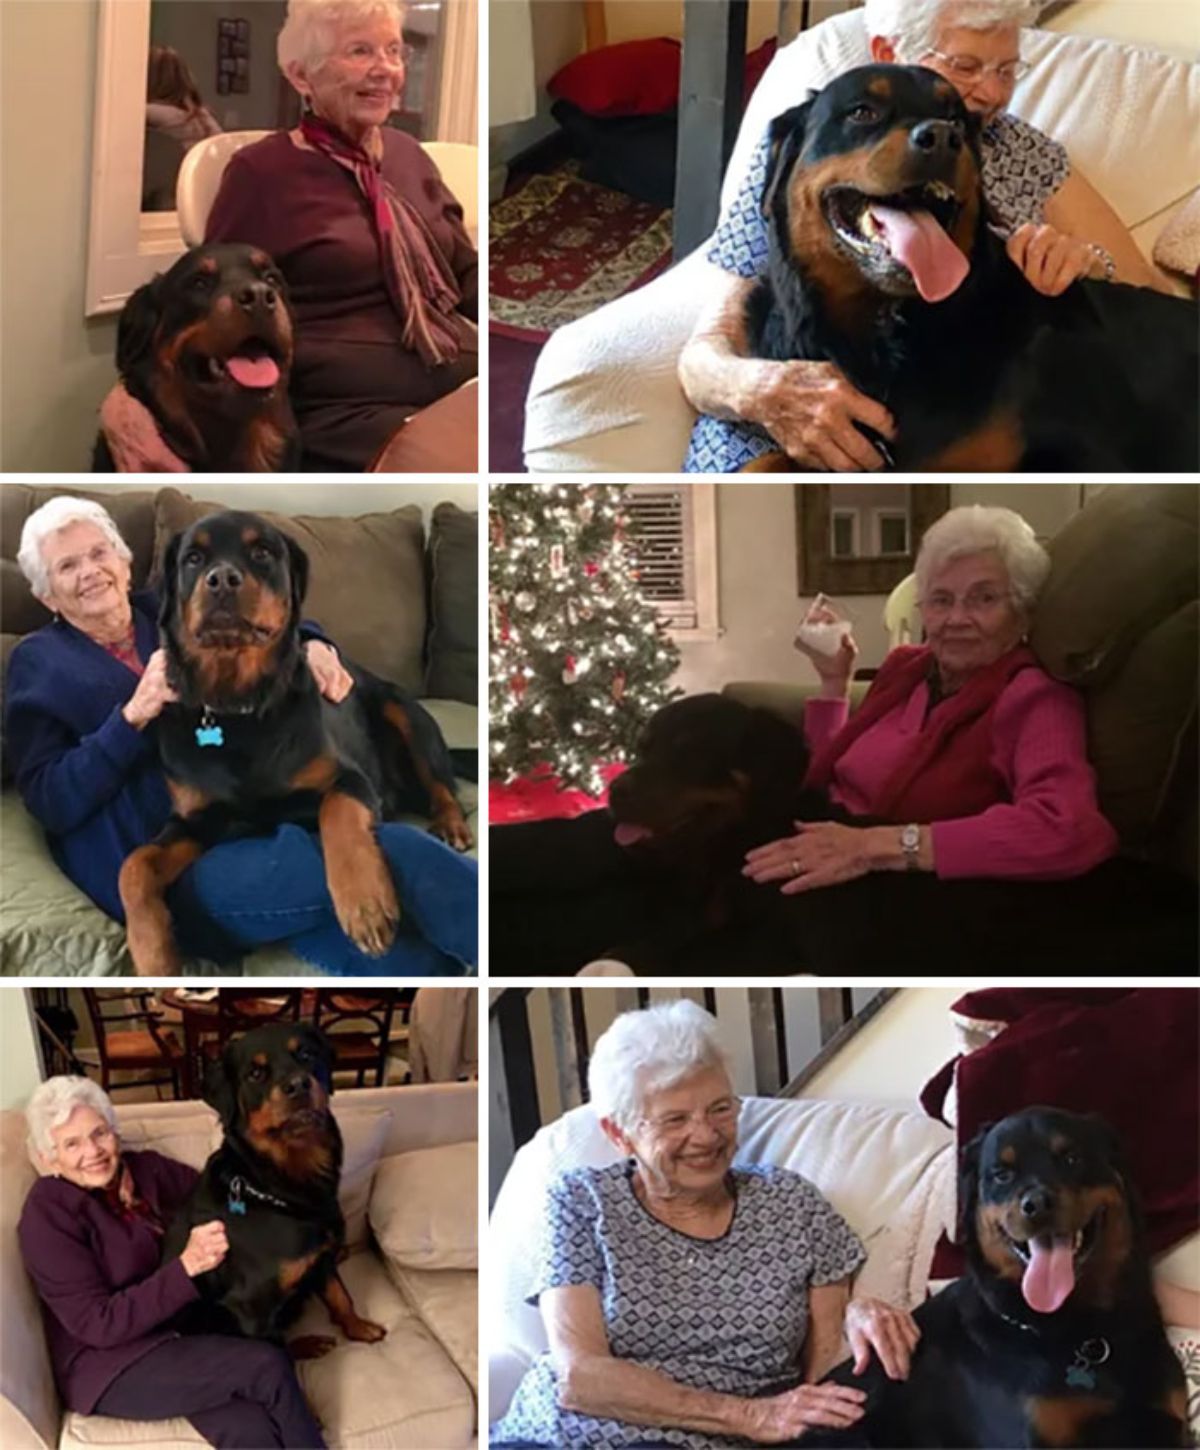 6 photos of a black and brown rottweiler with an old woman